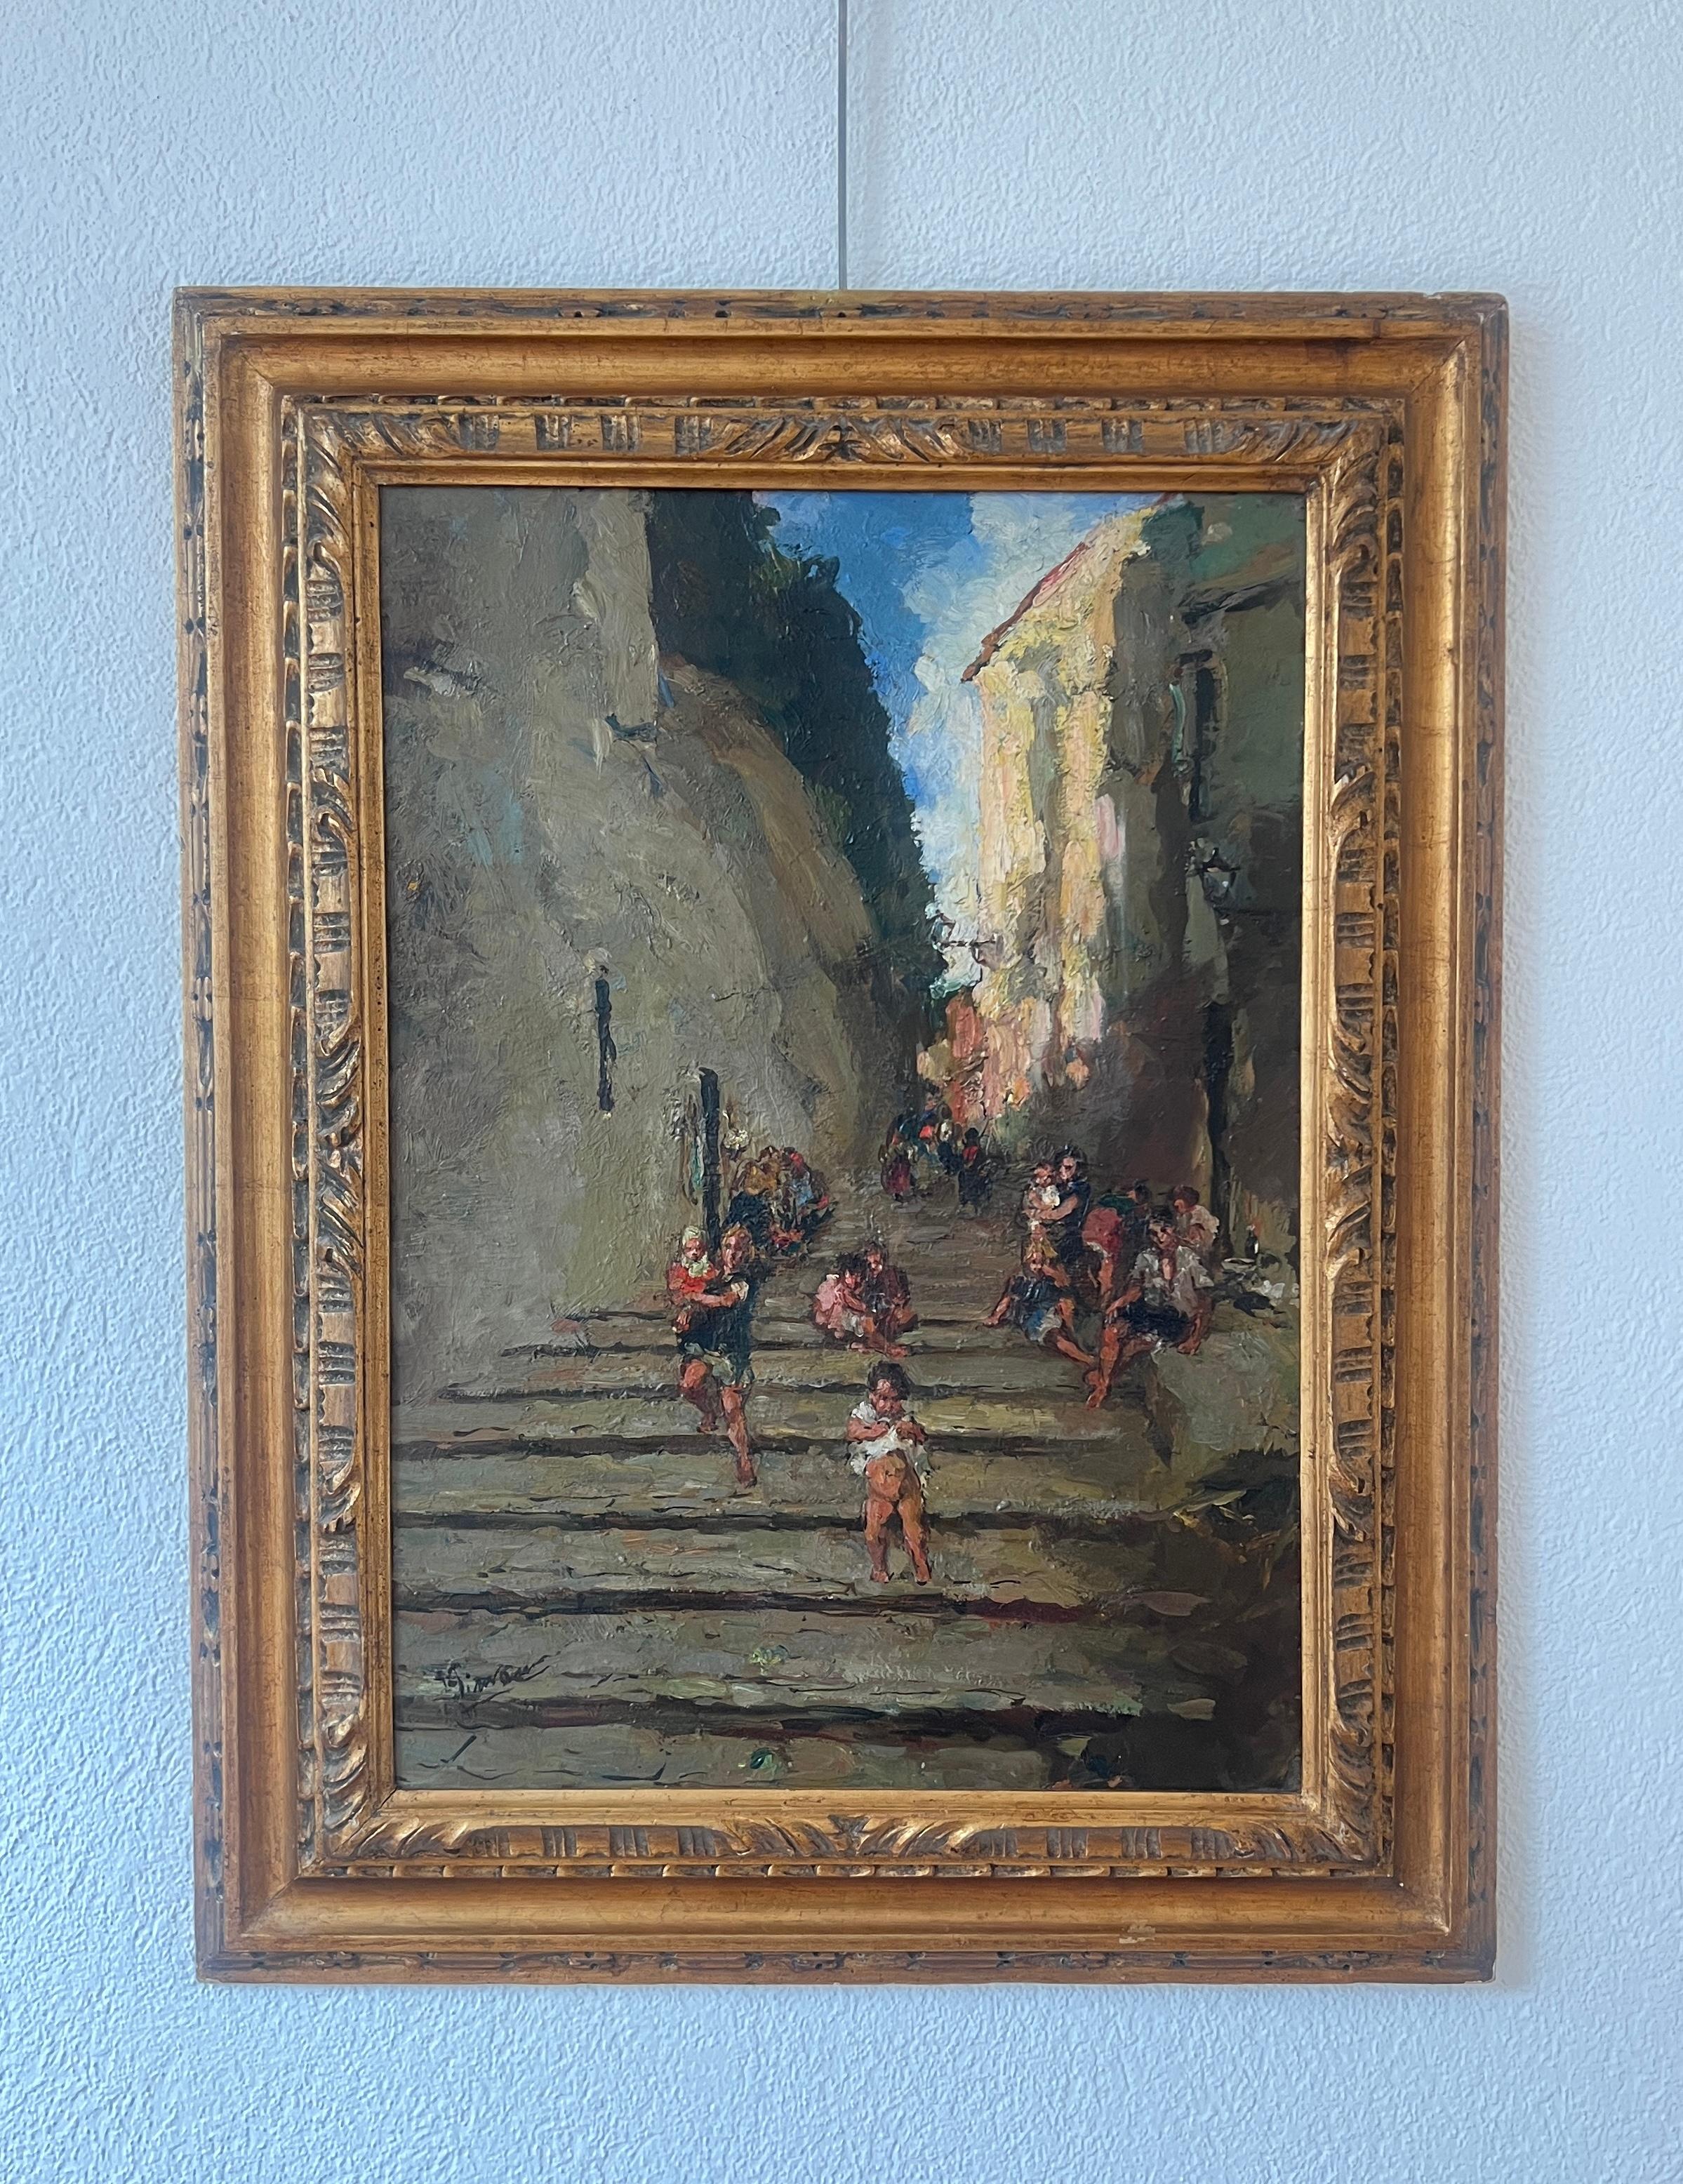 Street scene, Italy - Painting by Unknown